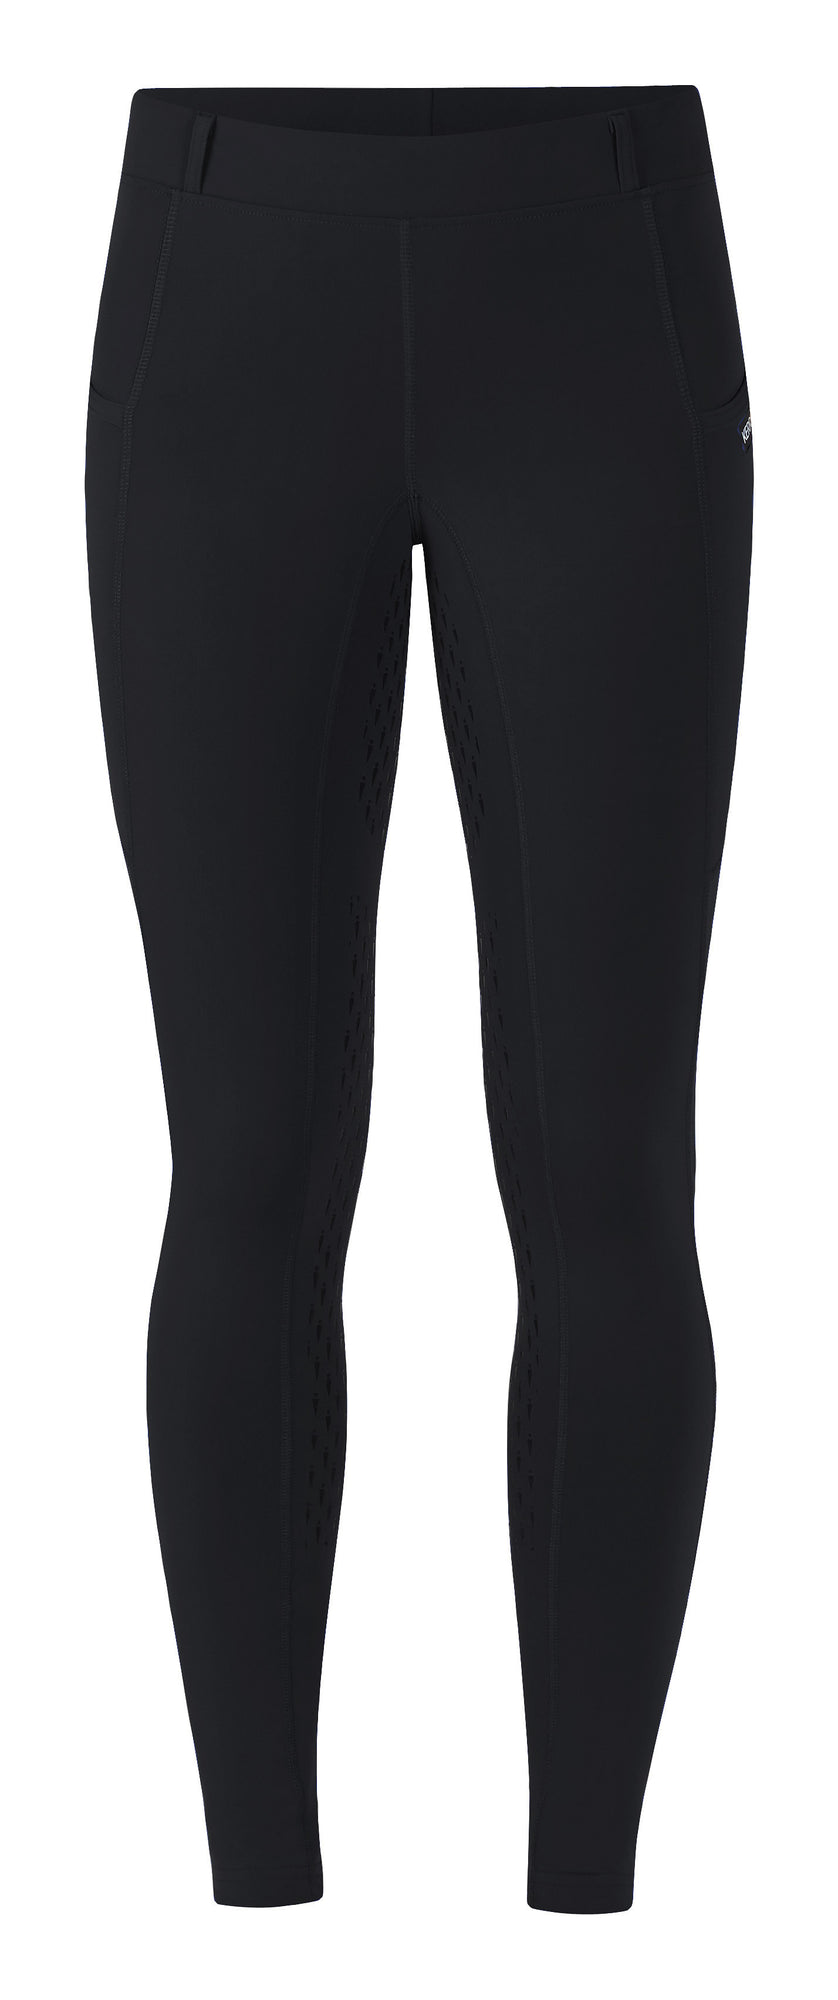 kerrits-breeches-info – Outlaw Outfitters